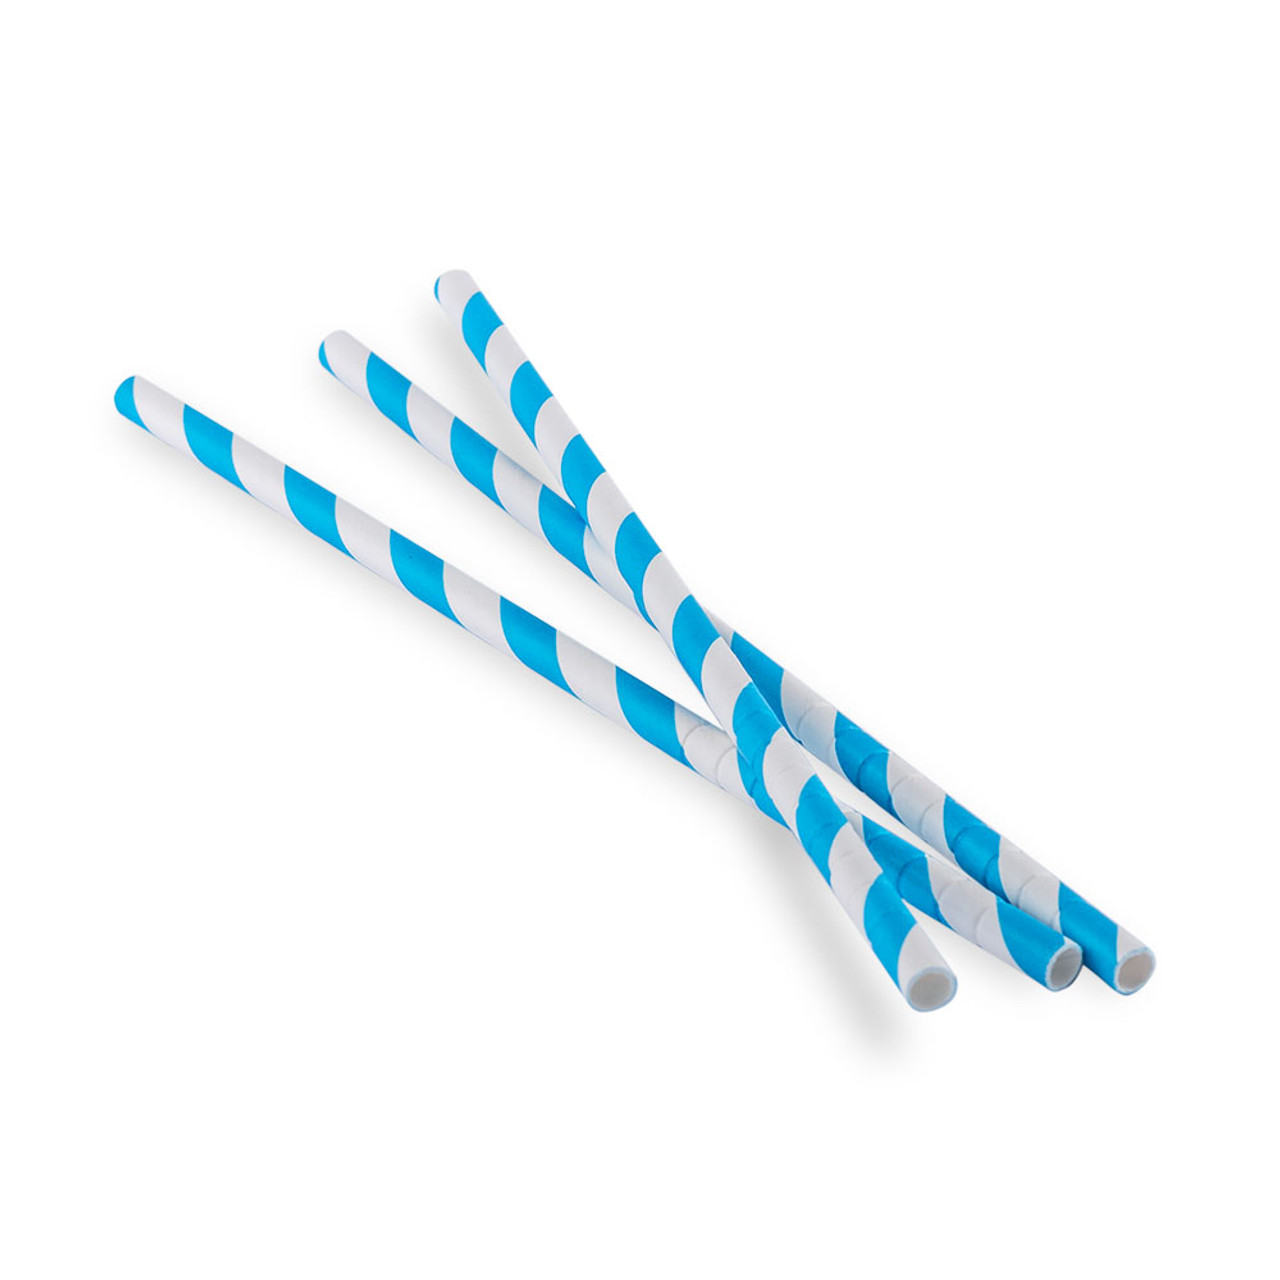 https://cdn11.bigcommerce.com/s-cznxq08r7/images/stencil/1280x1280/products/2850/1594/703442-aardvark_eco-flex_bendable_paper_drinking_straws_-_blue_white_stripes_-_7.75_l_-_box_of_400_wrapped_straws_-1__19360.1590765192.jpg?c=1